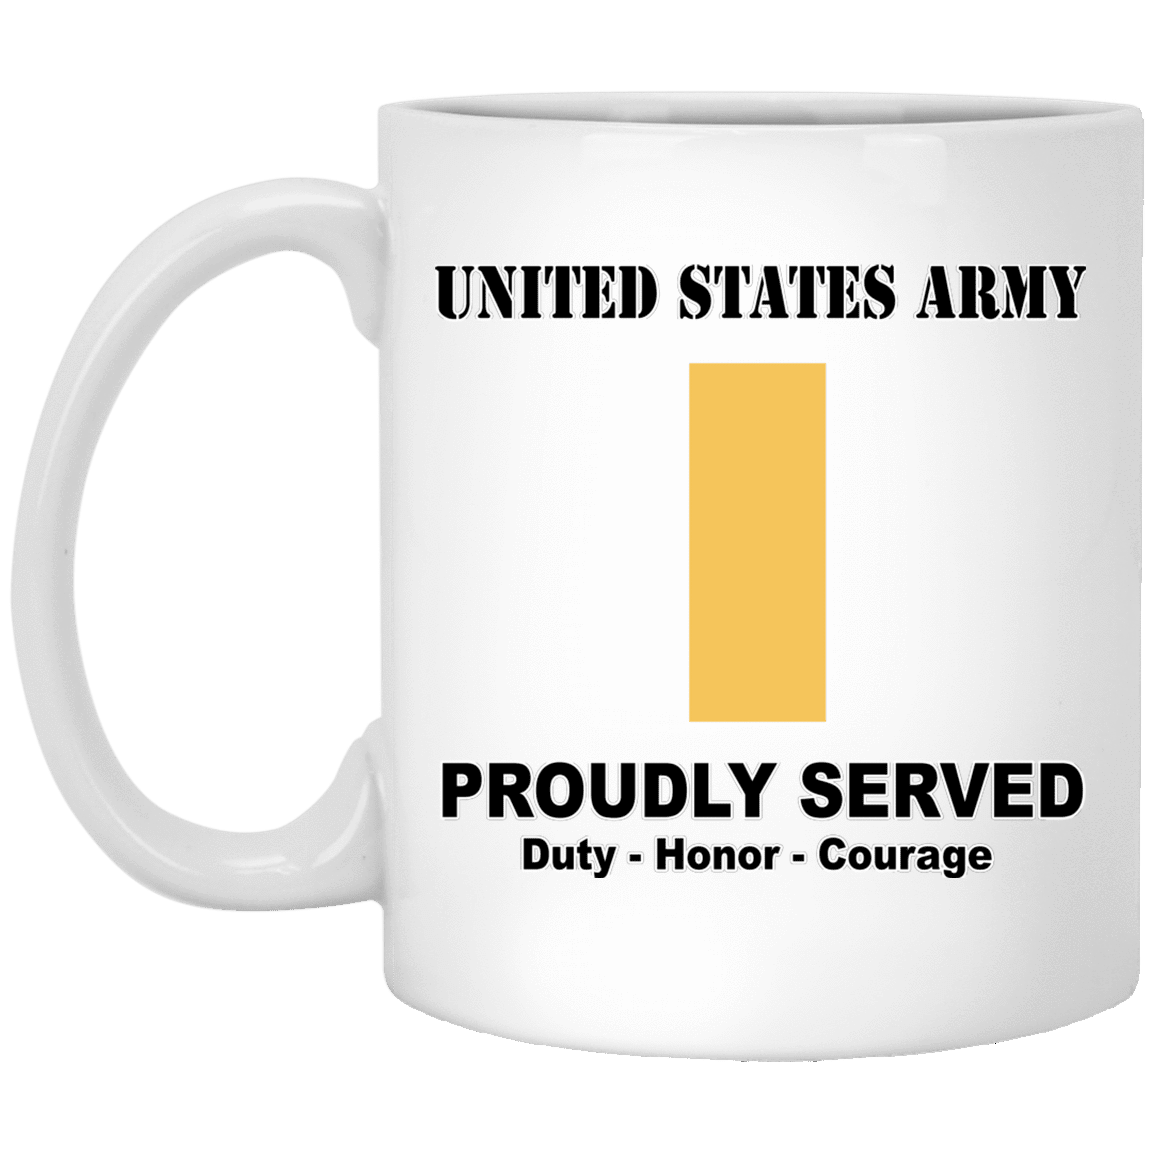 US Army Insignia Proudly Served Duty - Honor - Courage White Coffee Mug 11oz-Mug-Army-Veterans Nation